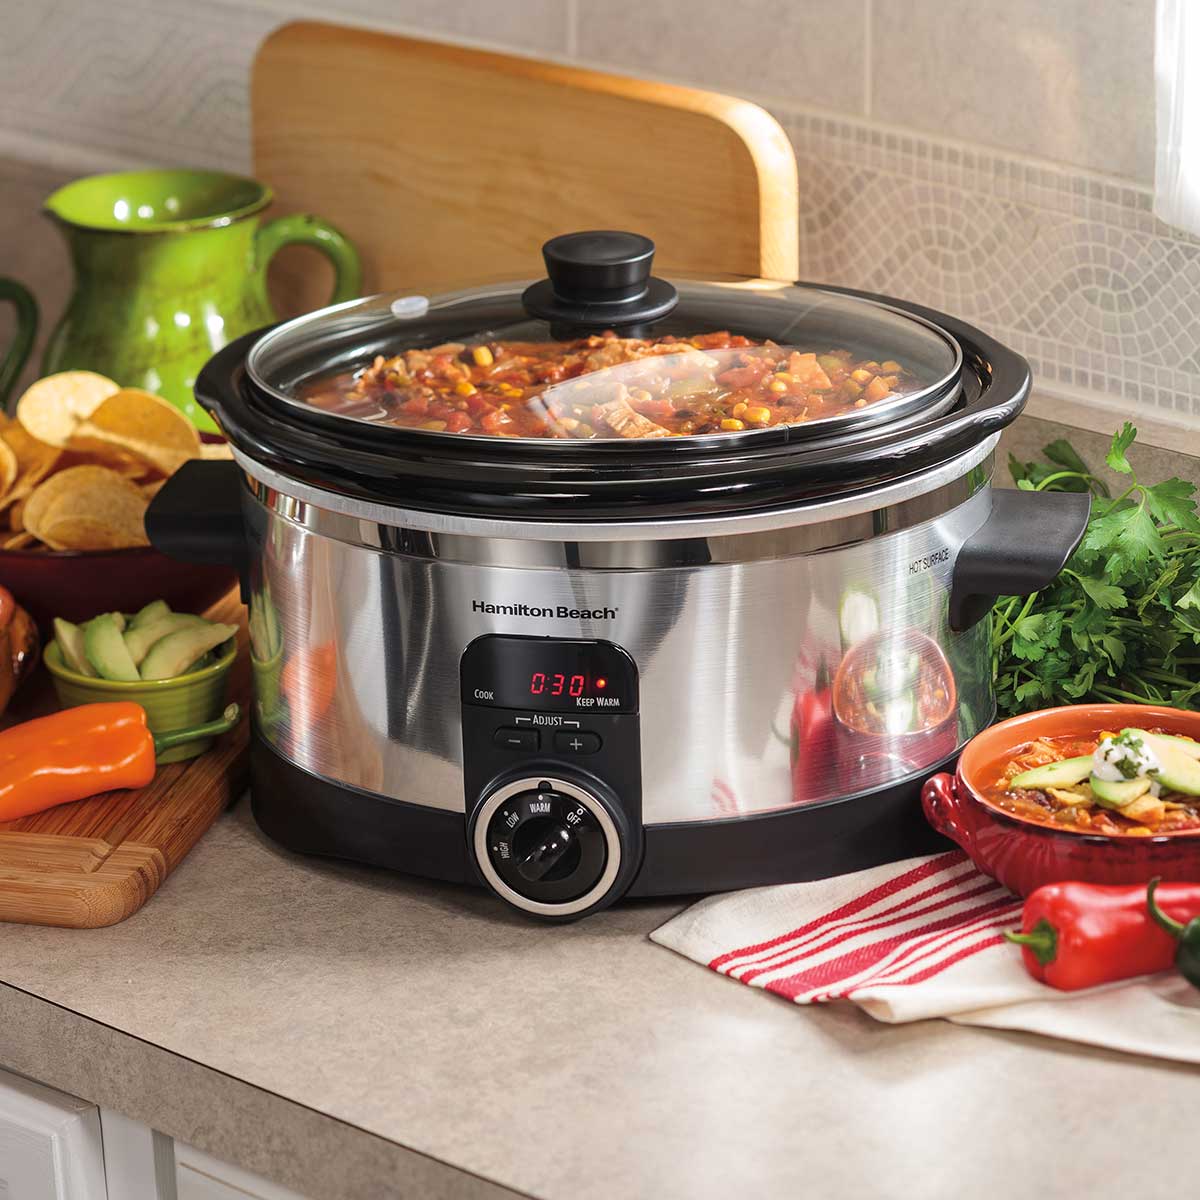 What Is Slow Cooker Used For